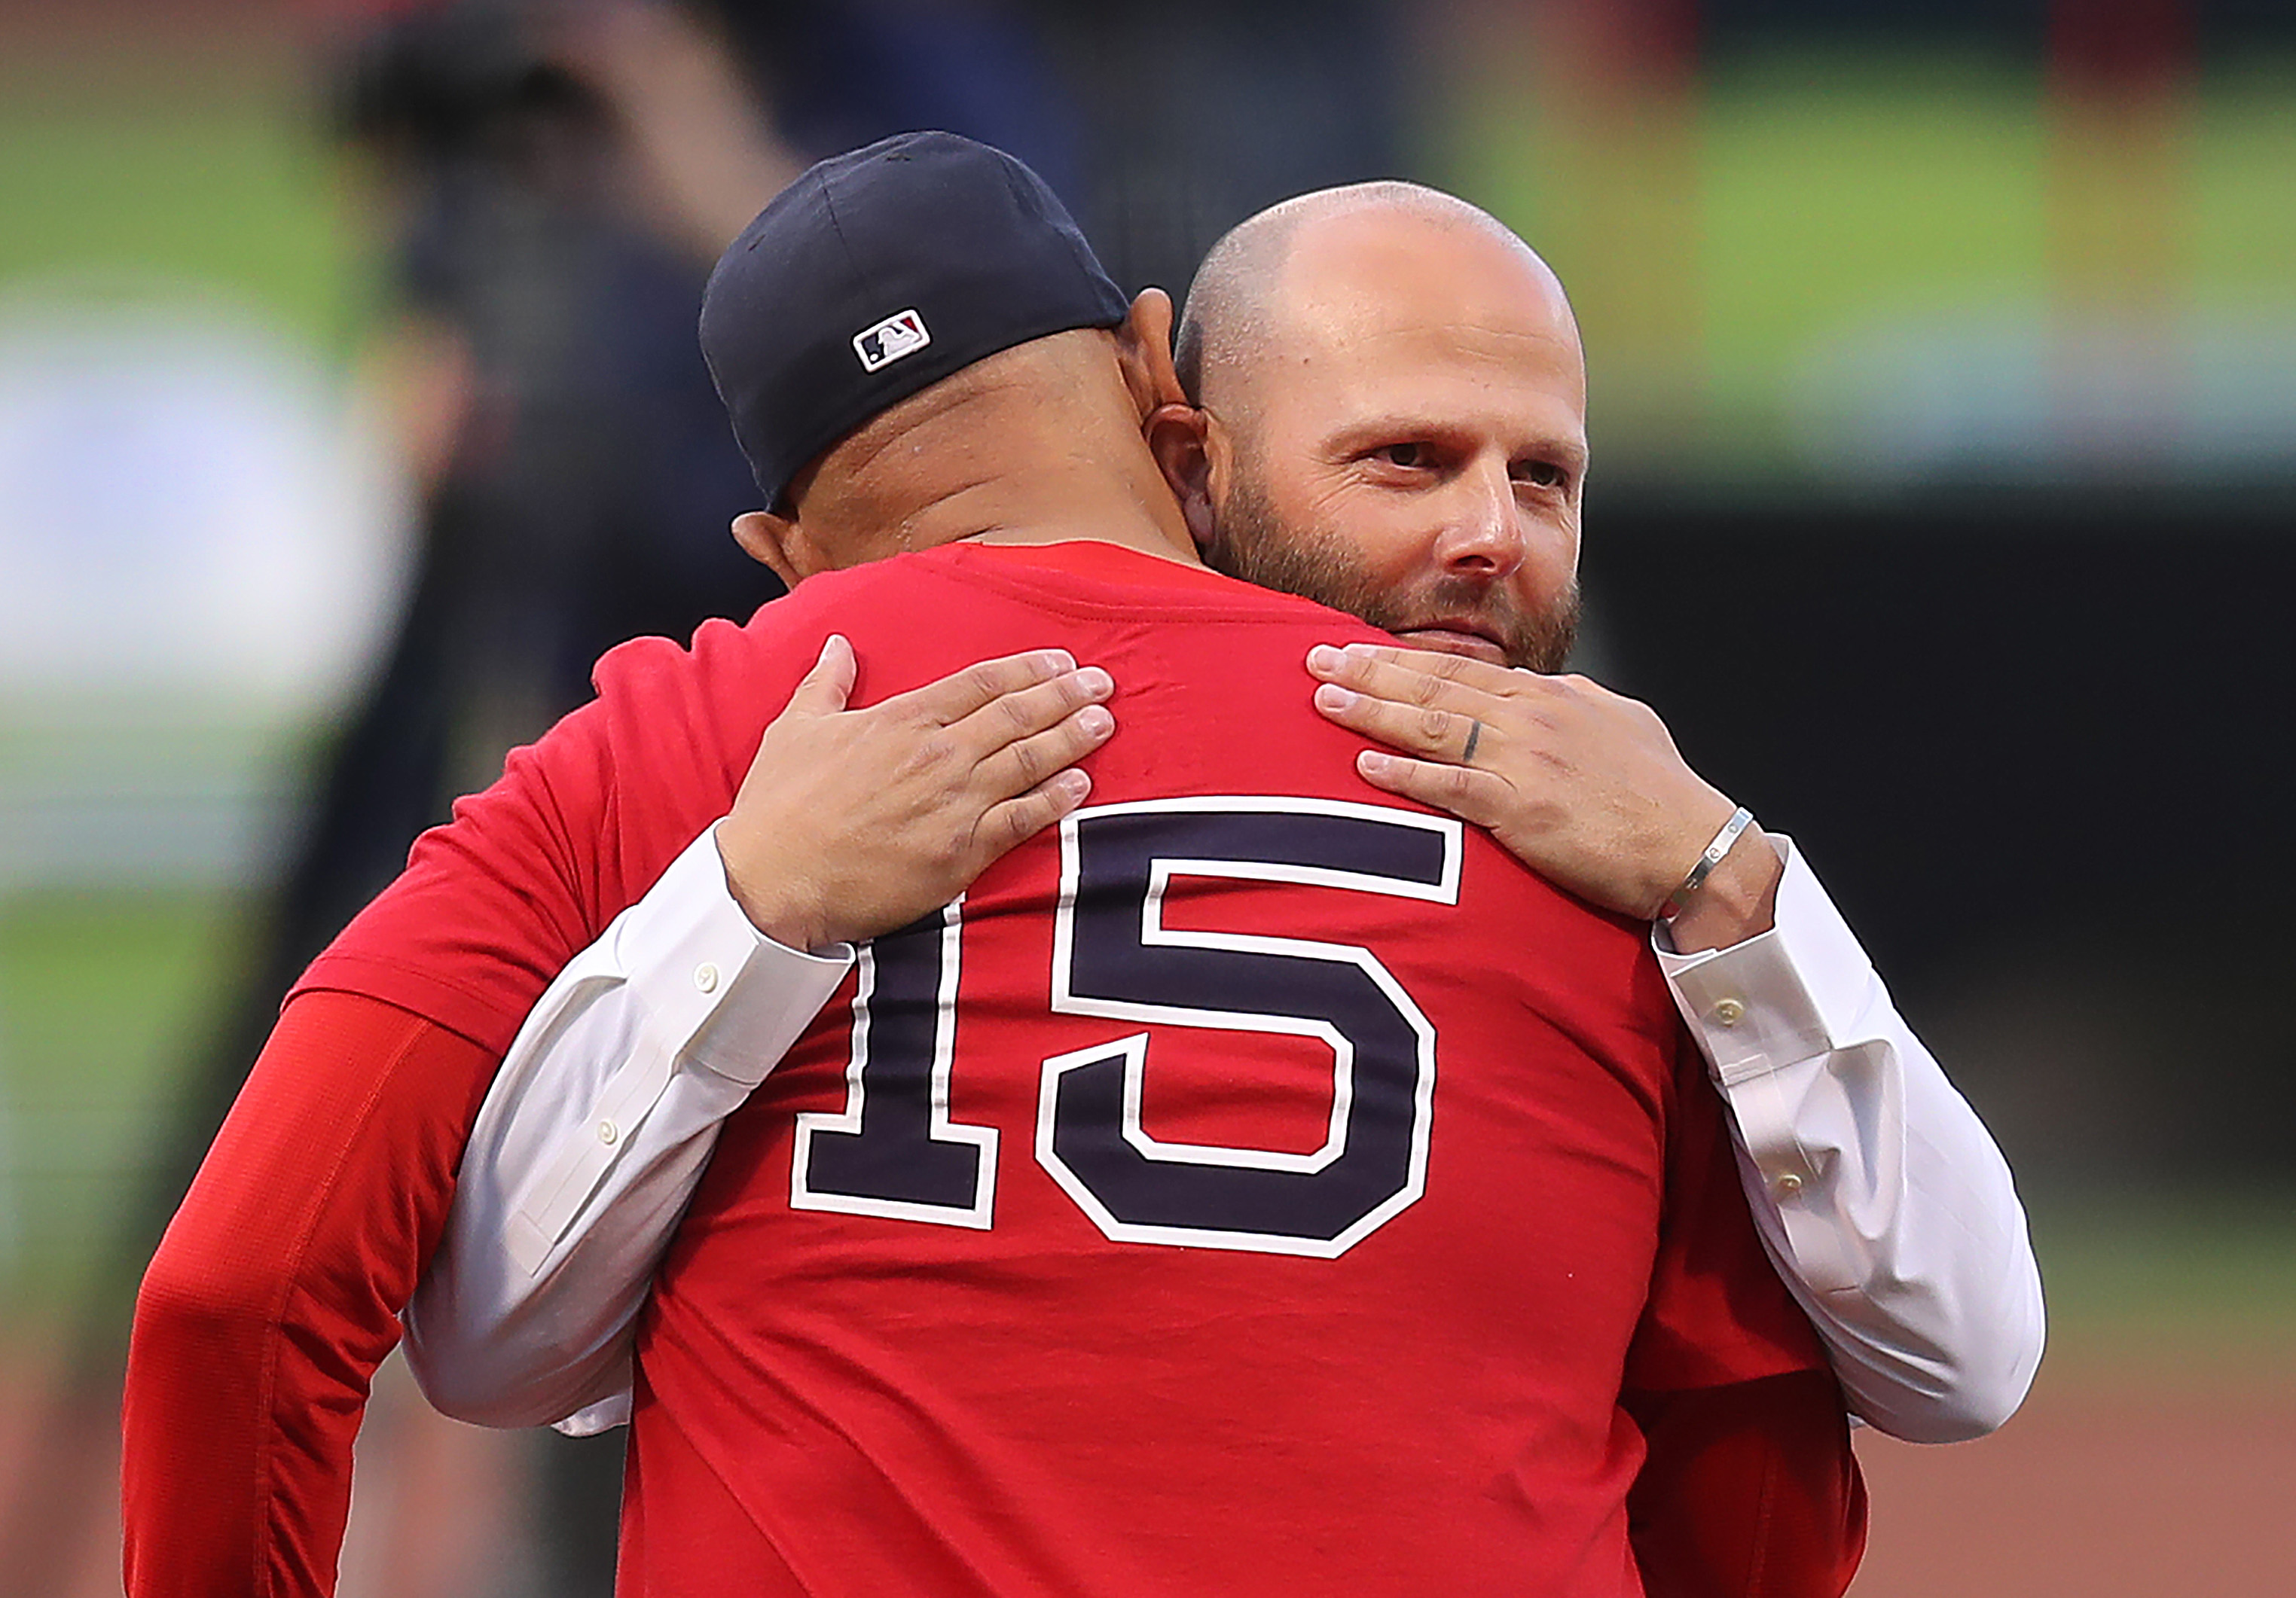 Dustin Pedroia retires: Coaching son's team helped Boston Red Sox